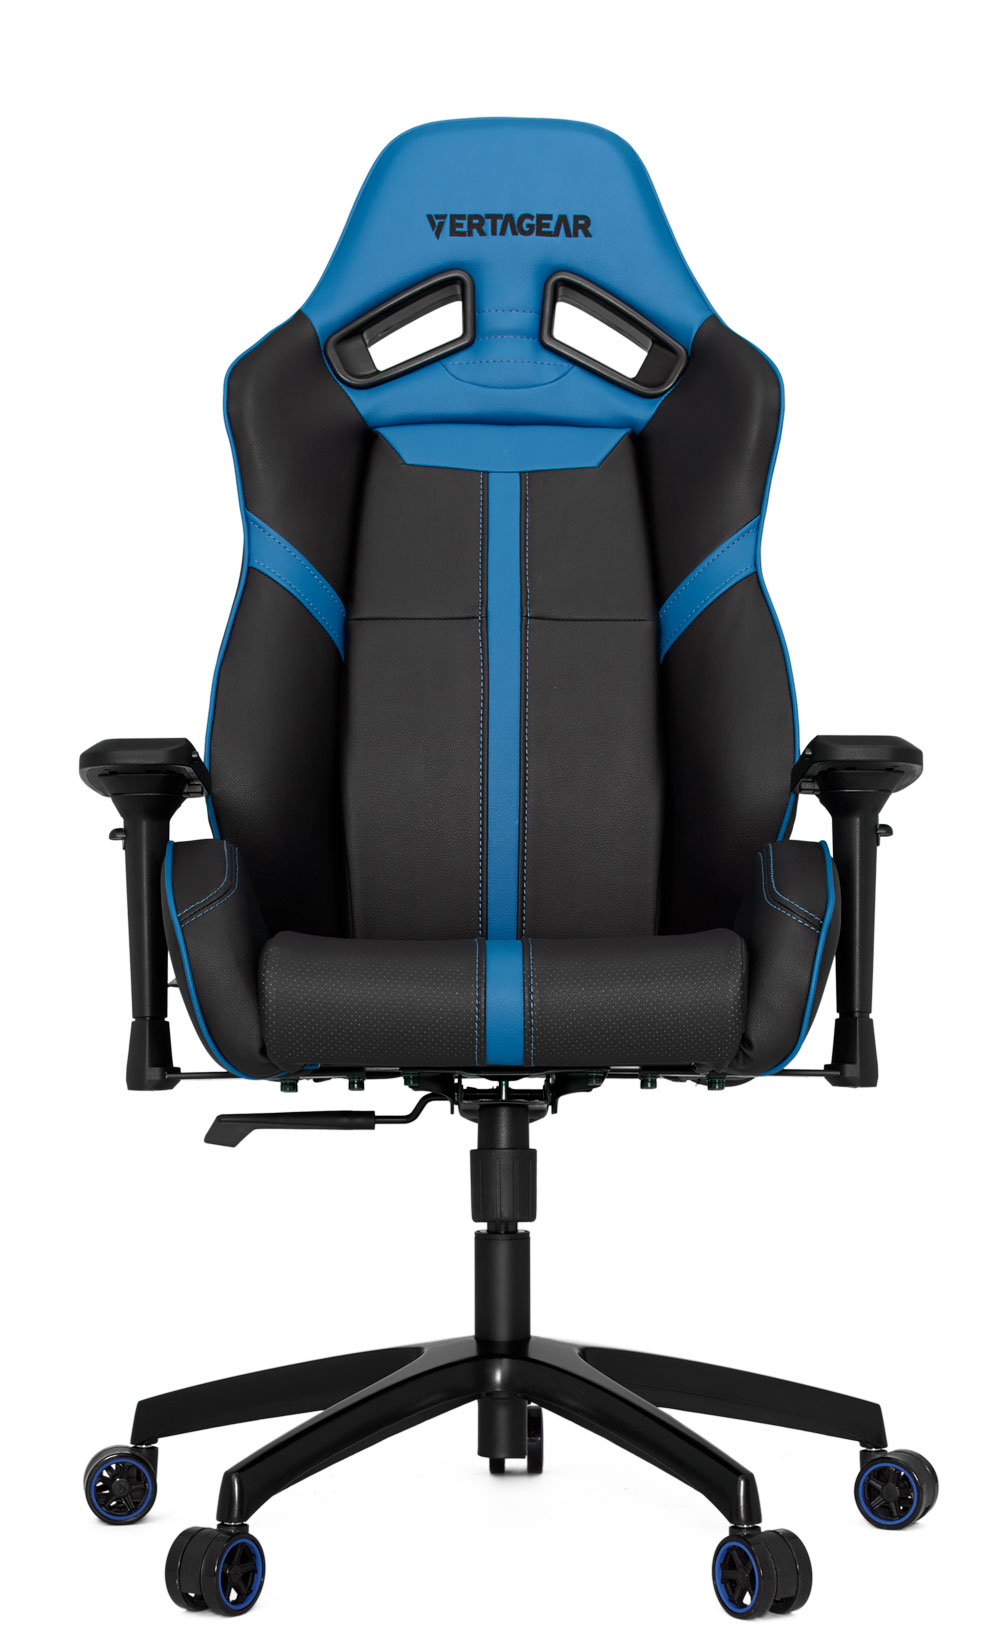 Vertagear SL5000 gaming chair review - All of the comfort for less cost